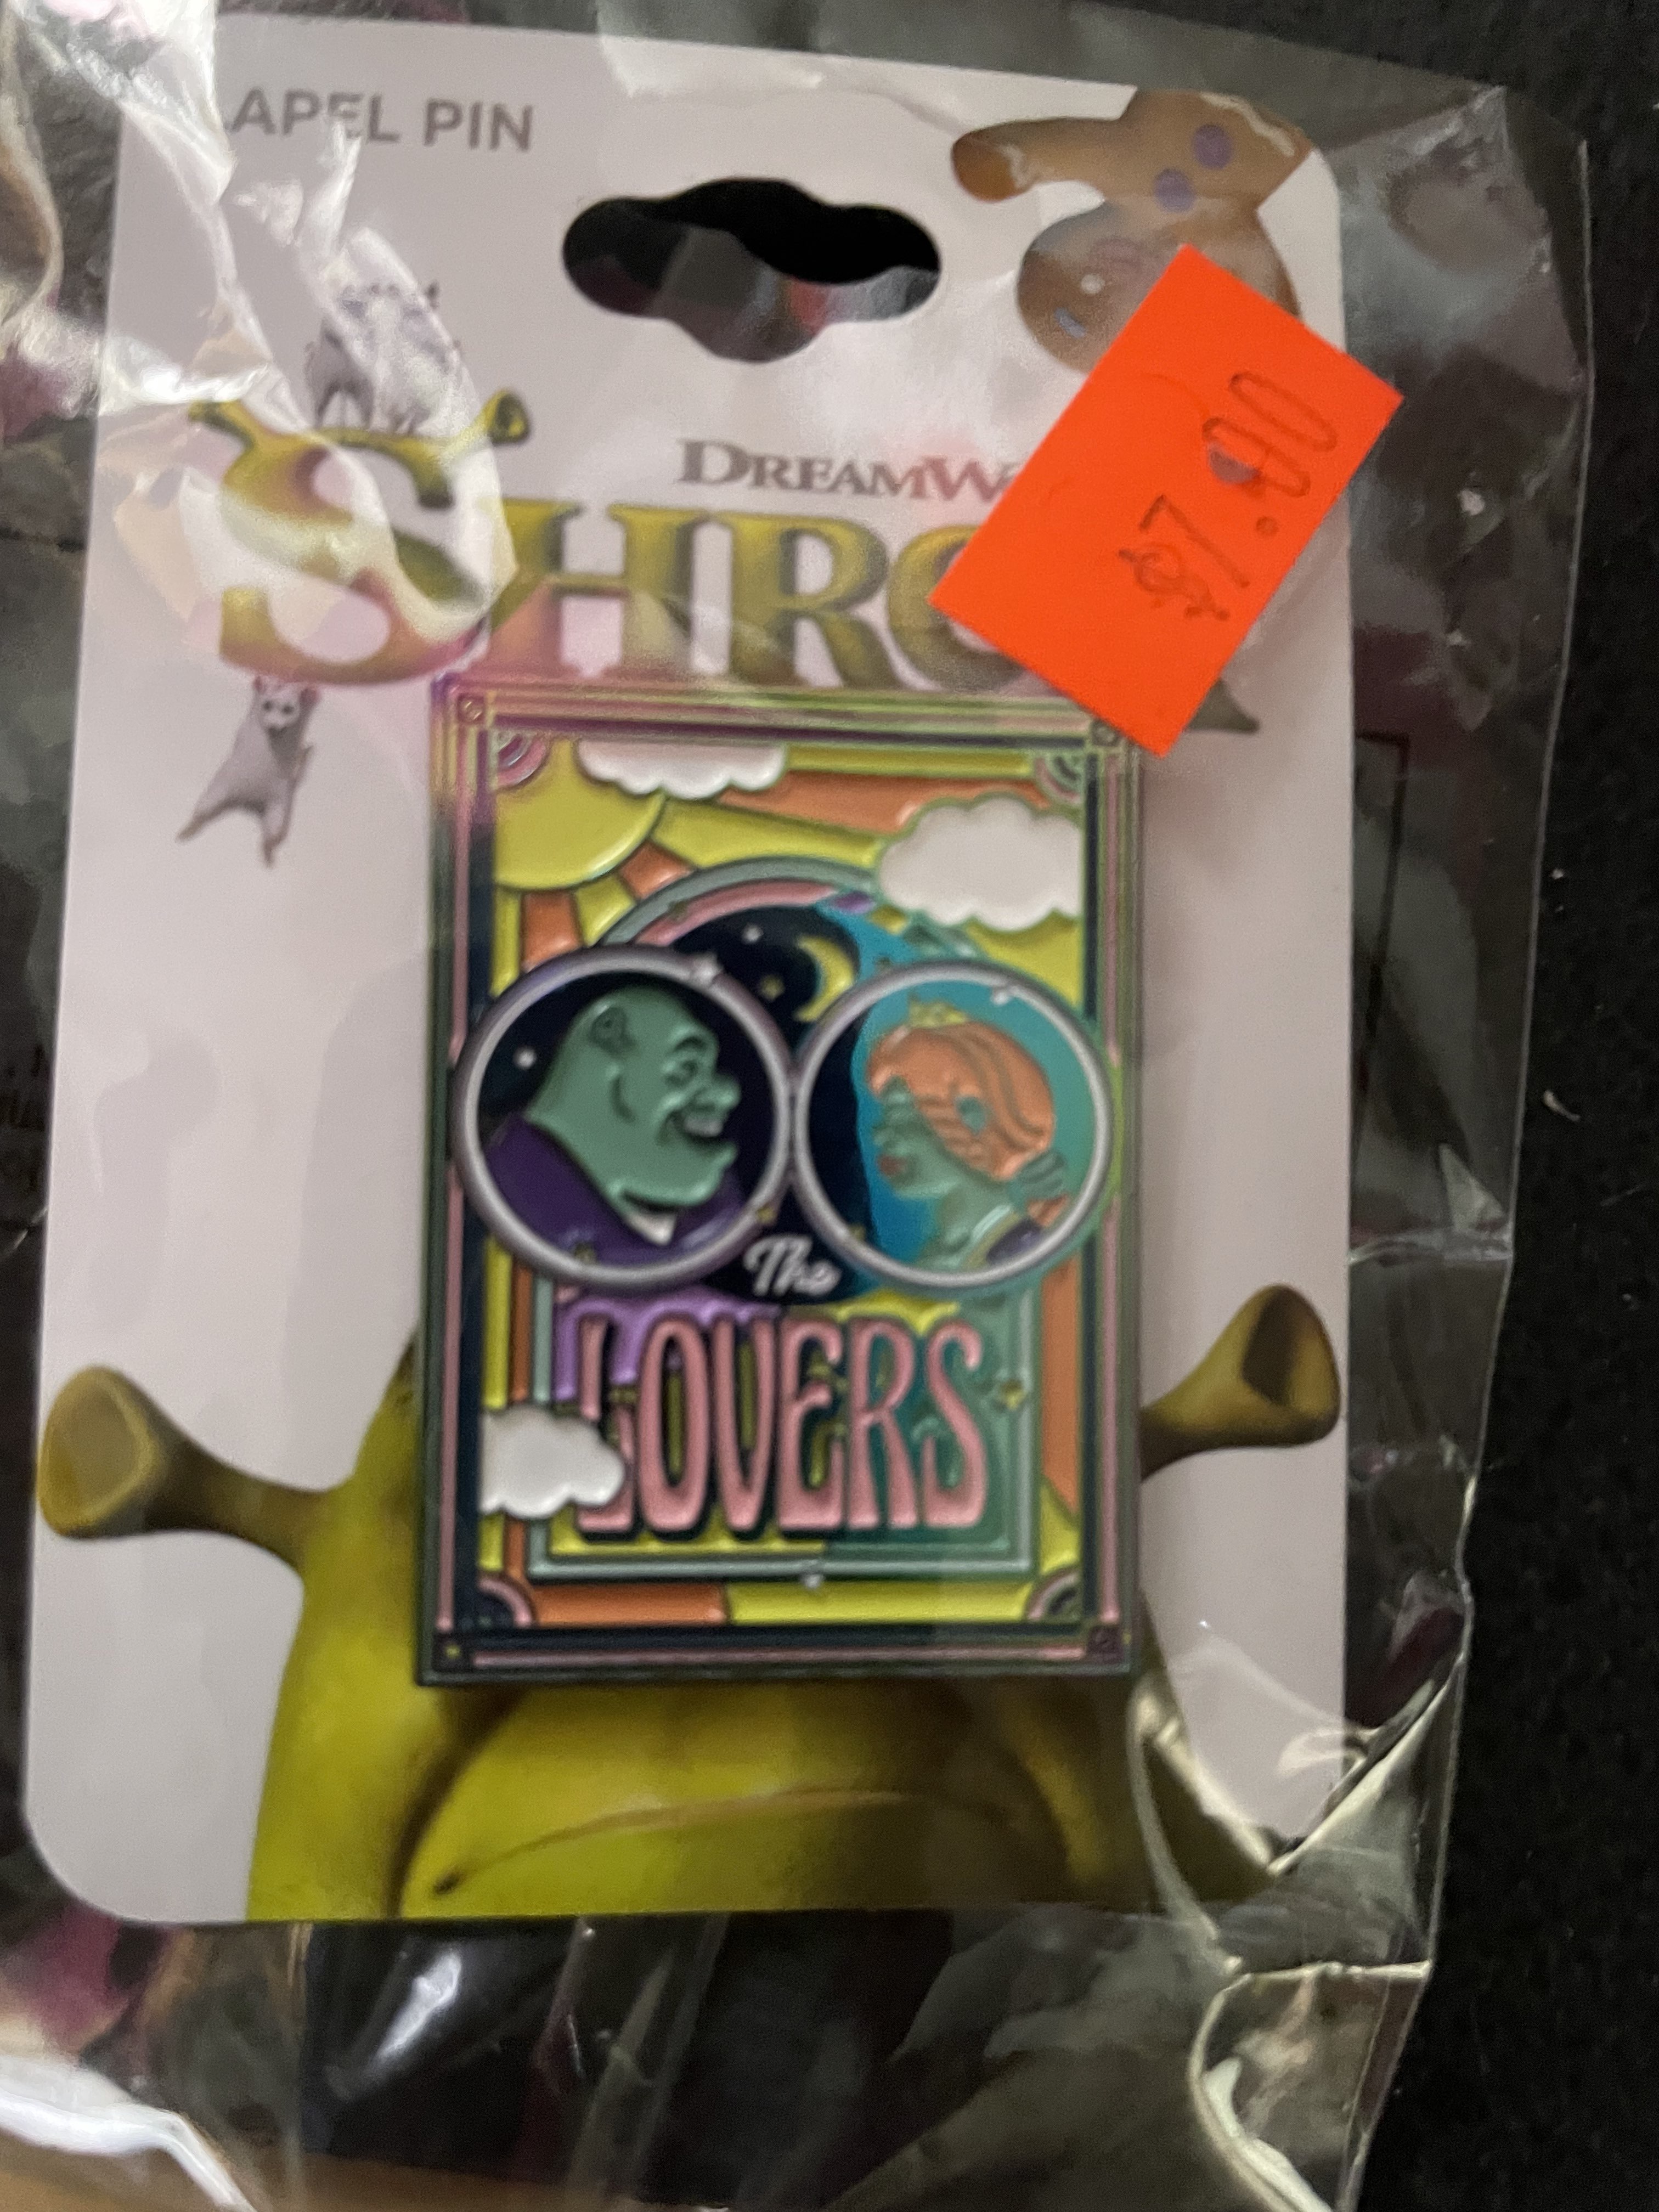 A LAPEL PIN OF SHREK AND FIONA FROM SHREK FACING EACHOTHER. BELOW THEM IT READS 'THE LOVERS'.